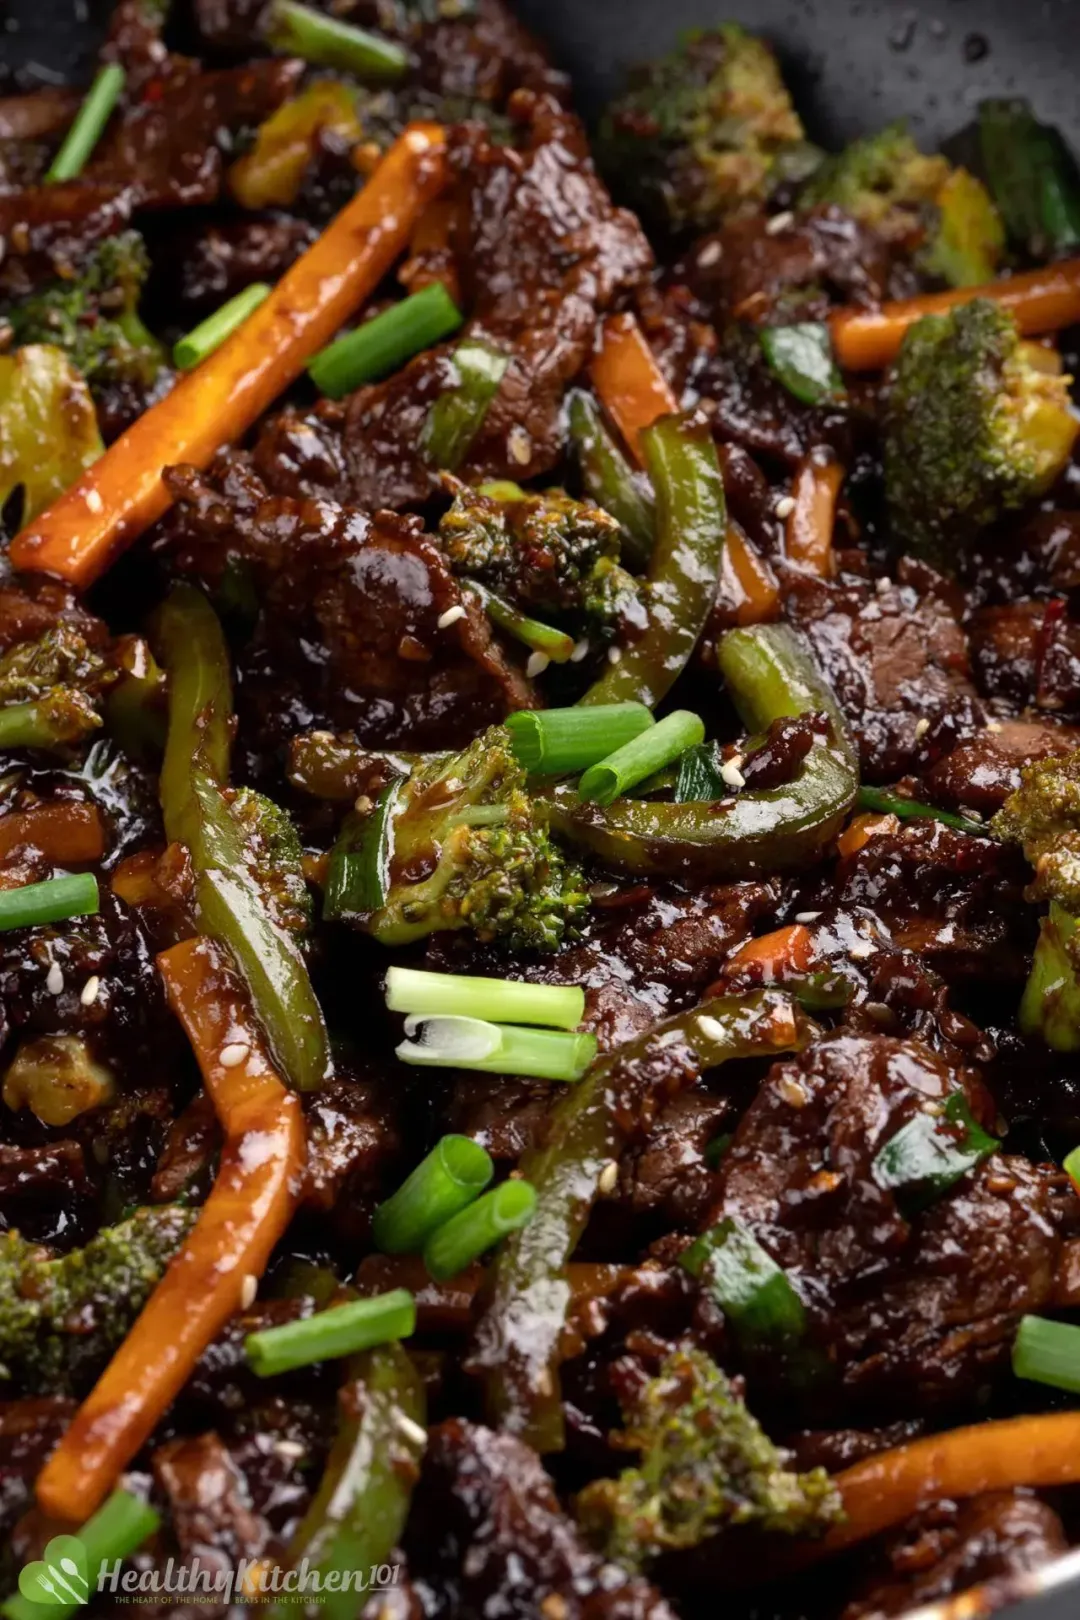 Mongolian Beef Recipe: A Healthy, Easy, Sweet, Spicy, and Savory Dish